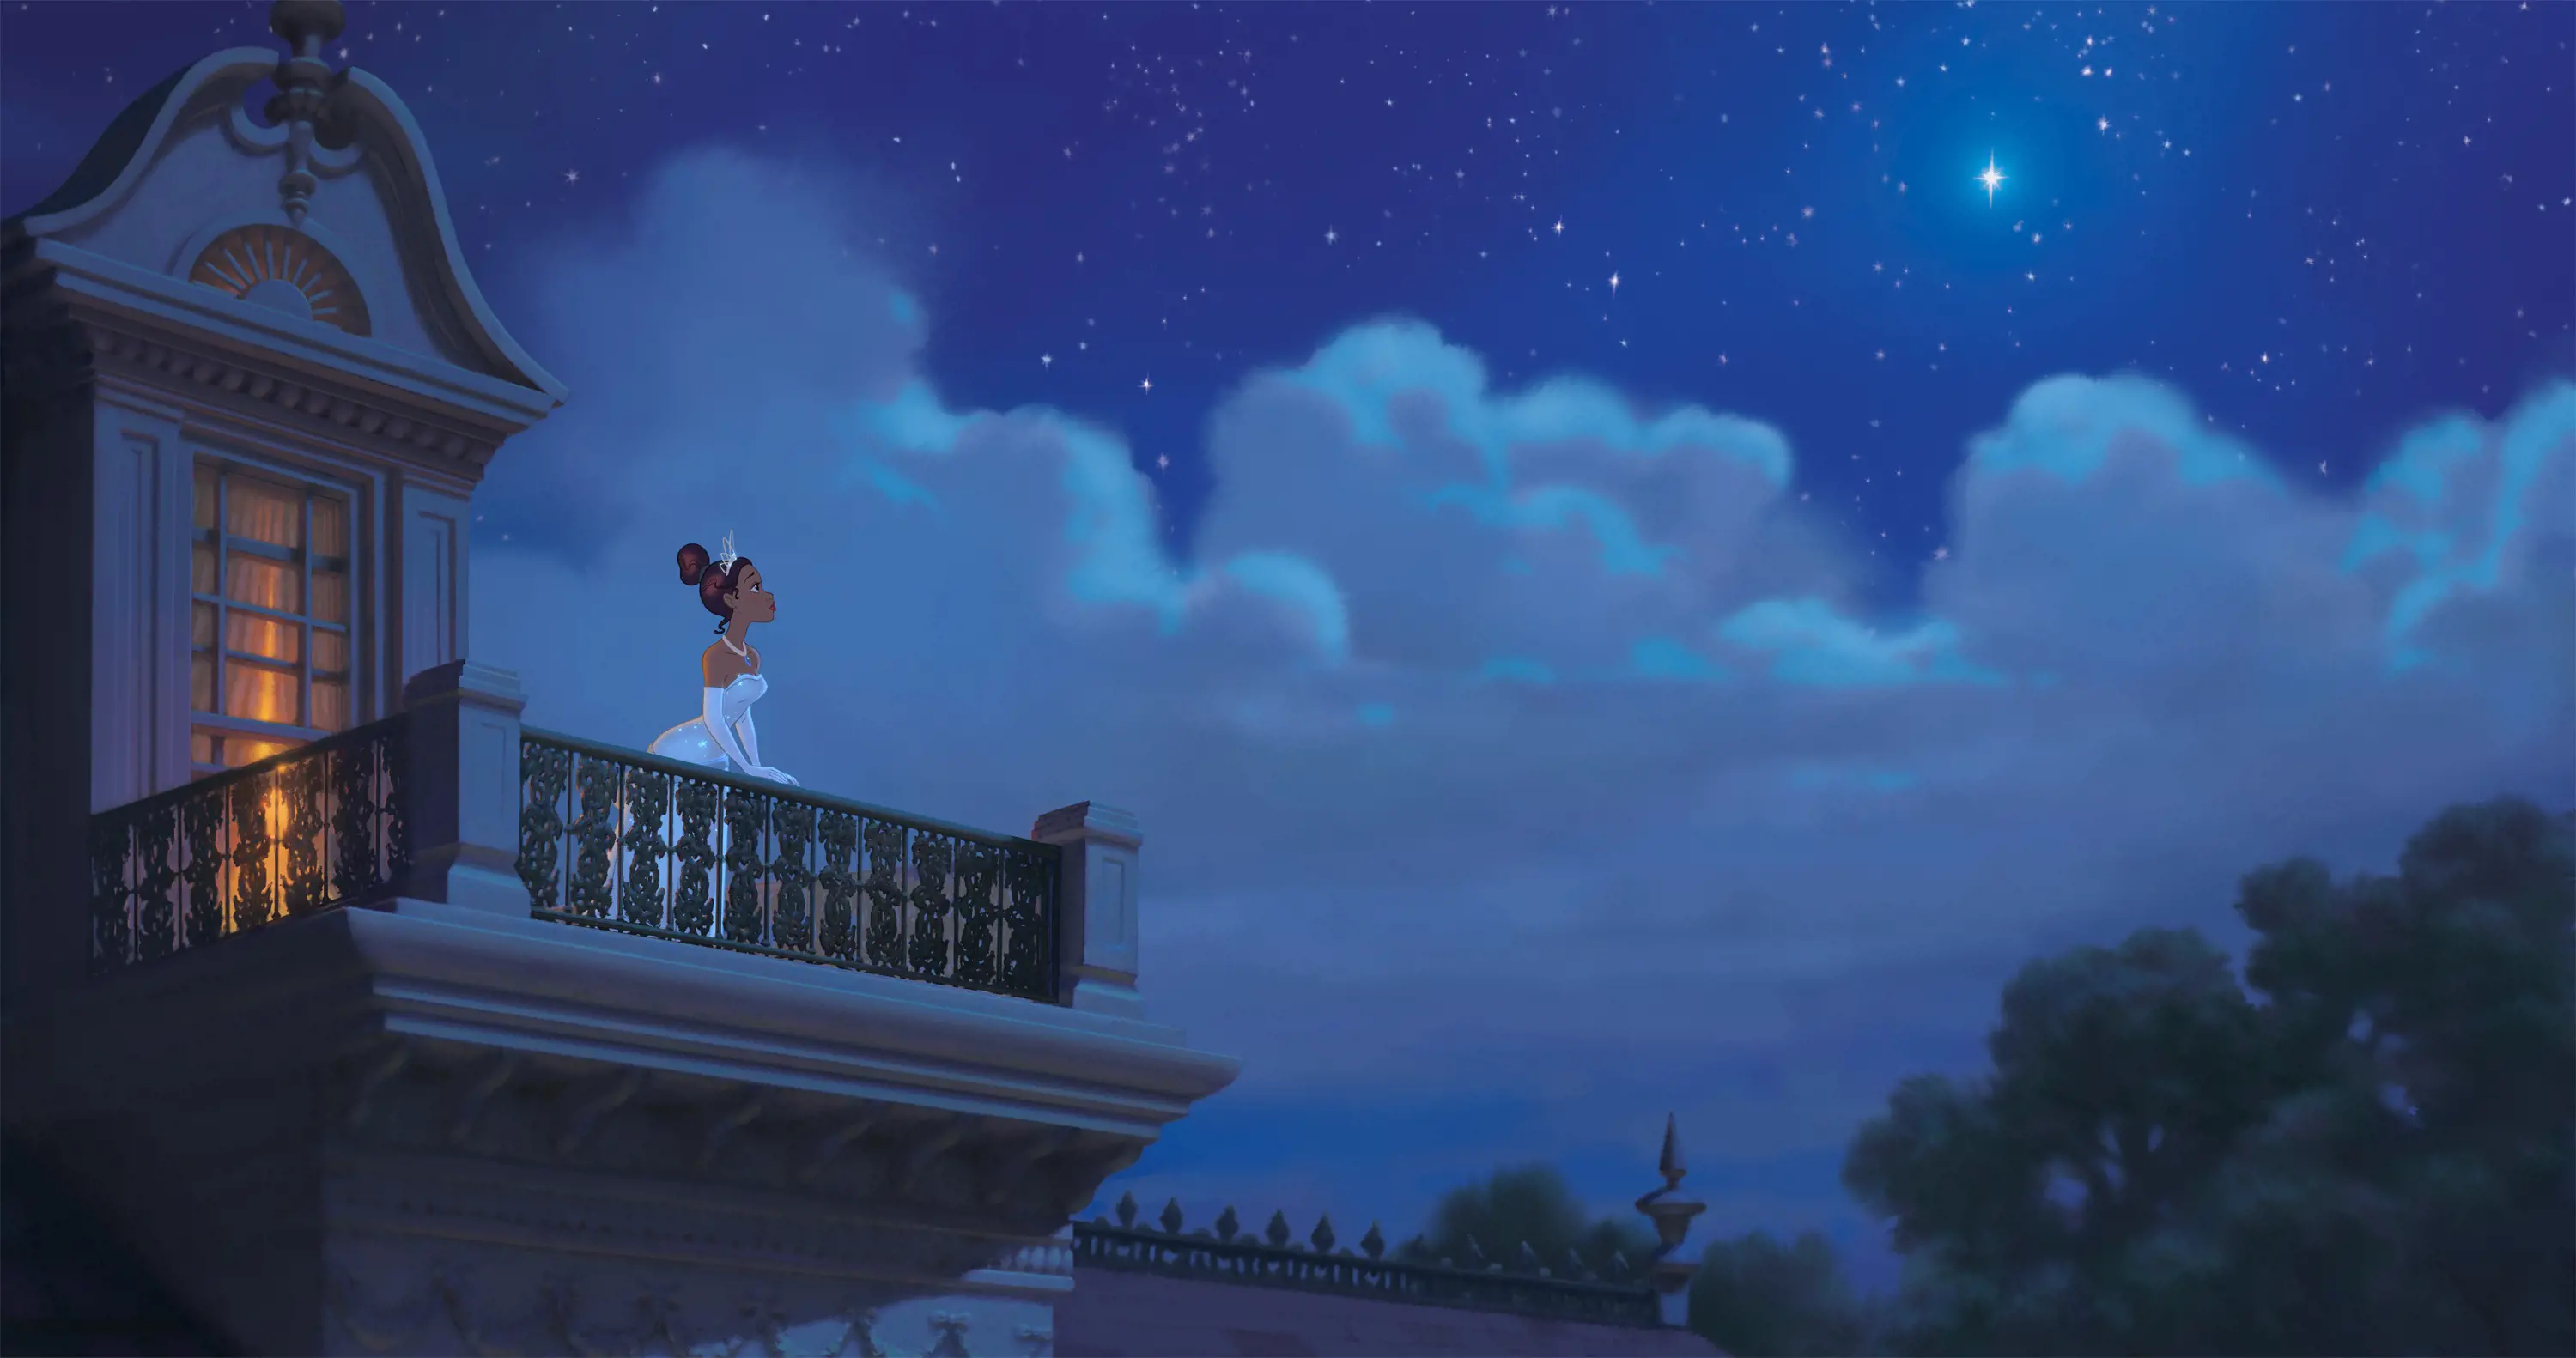 Princess and the Frog was premiered in theatre on 12 December 2009